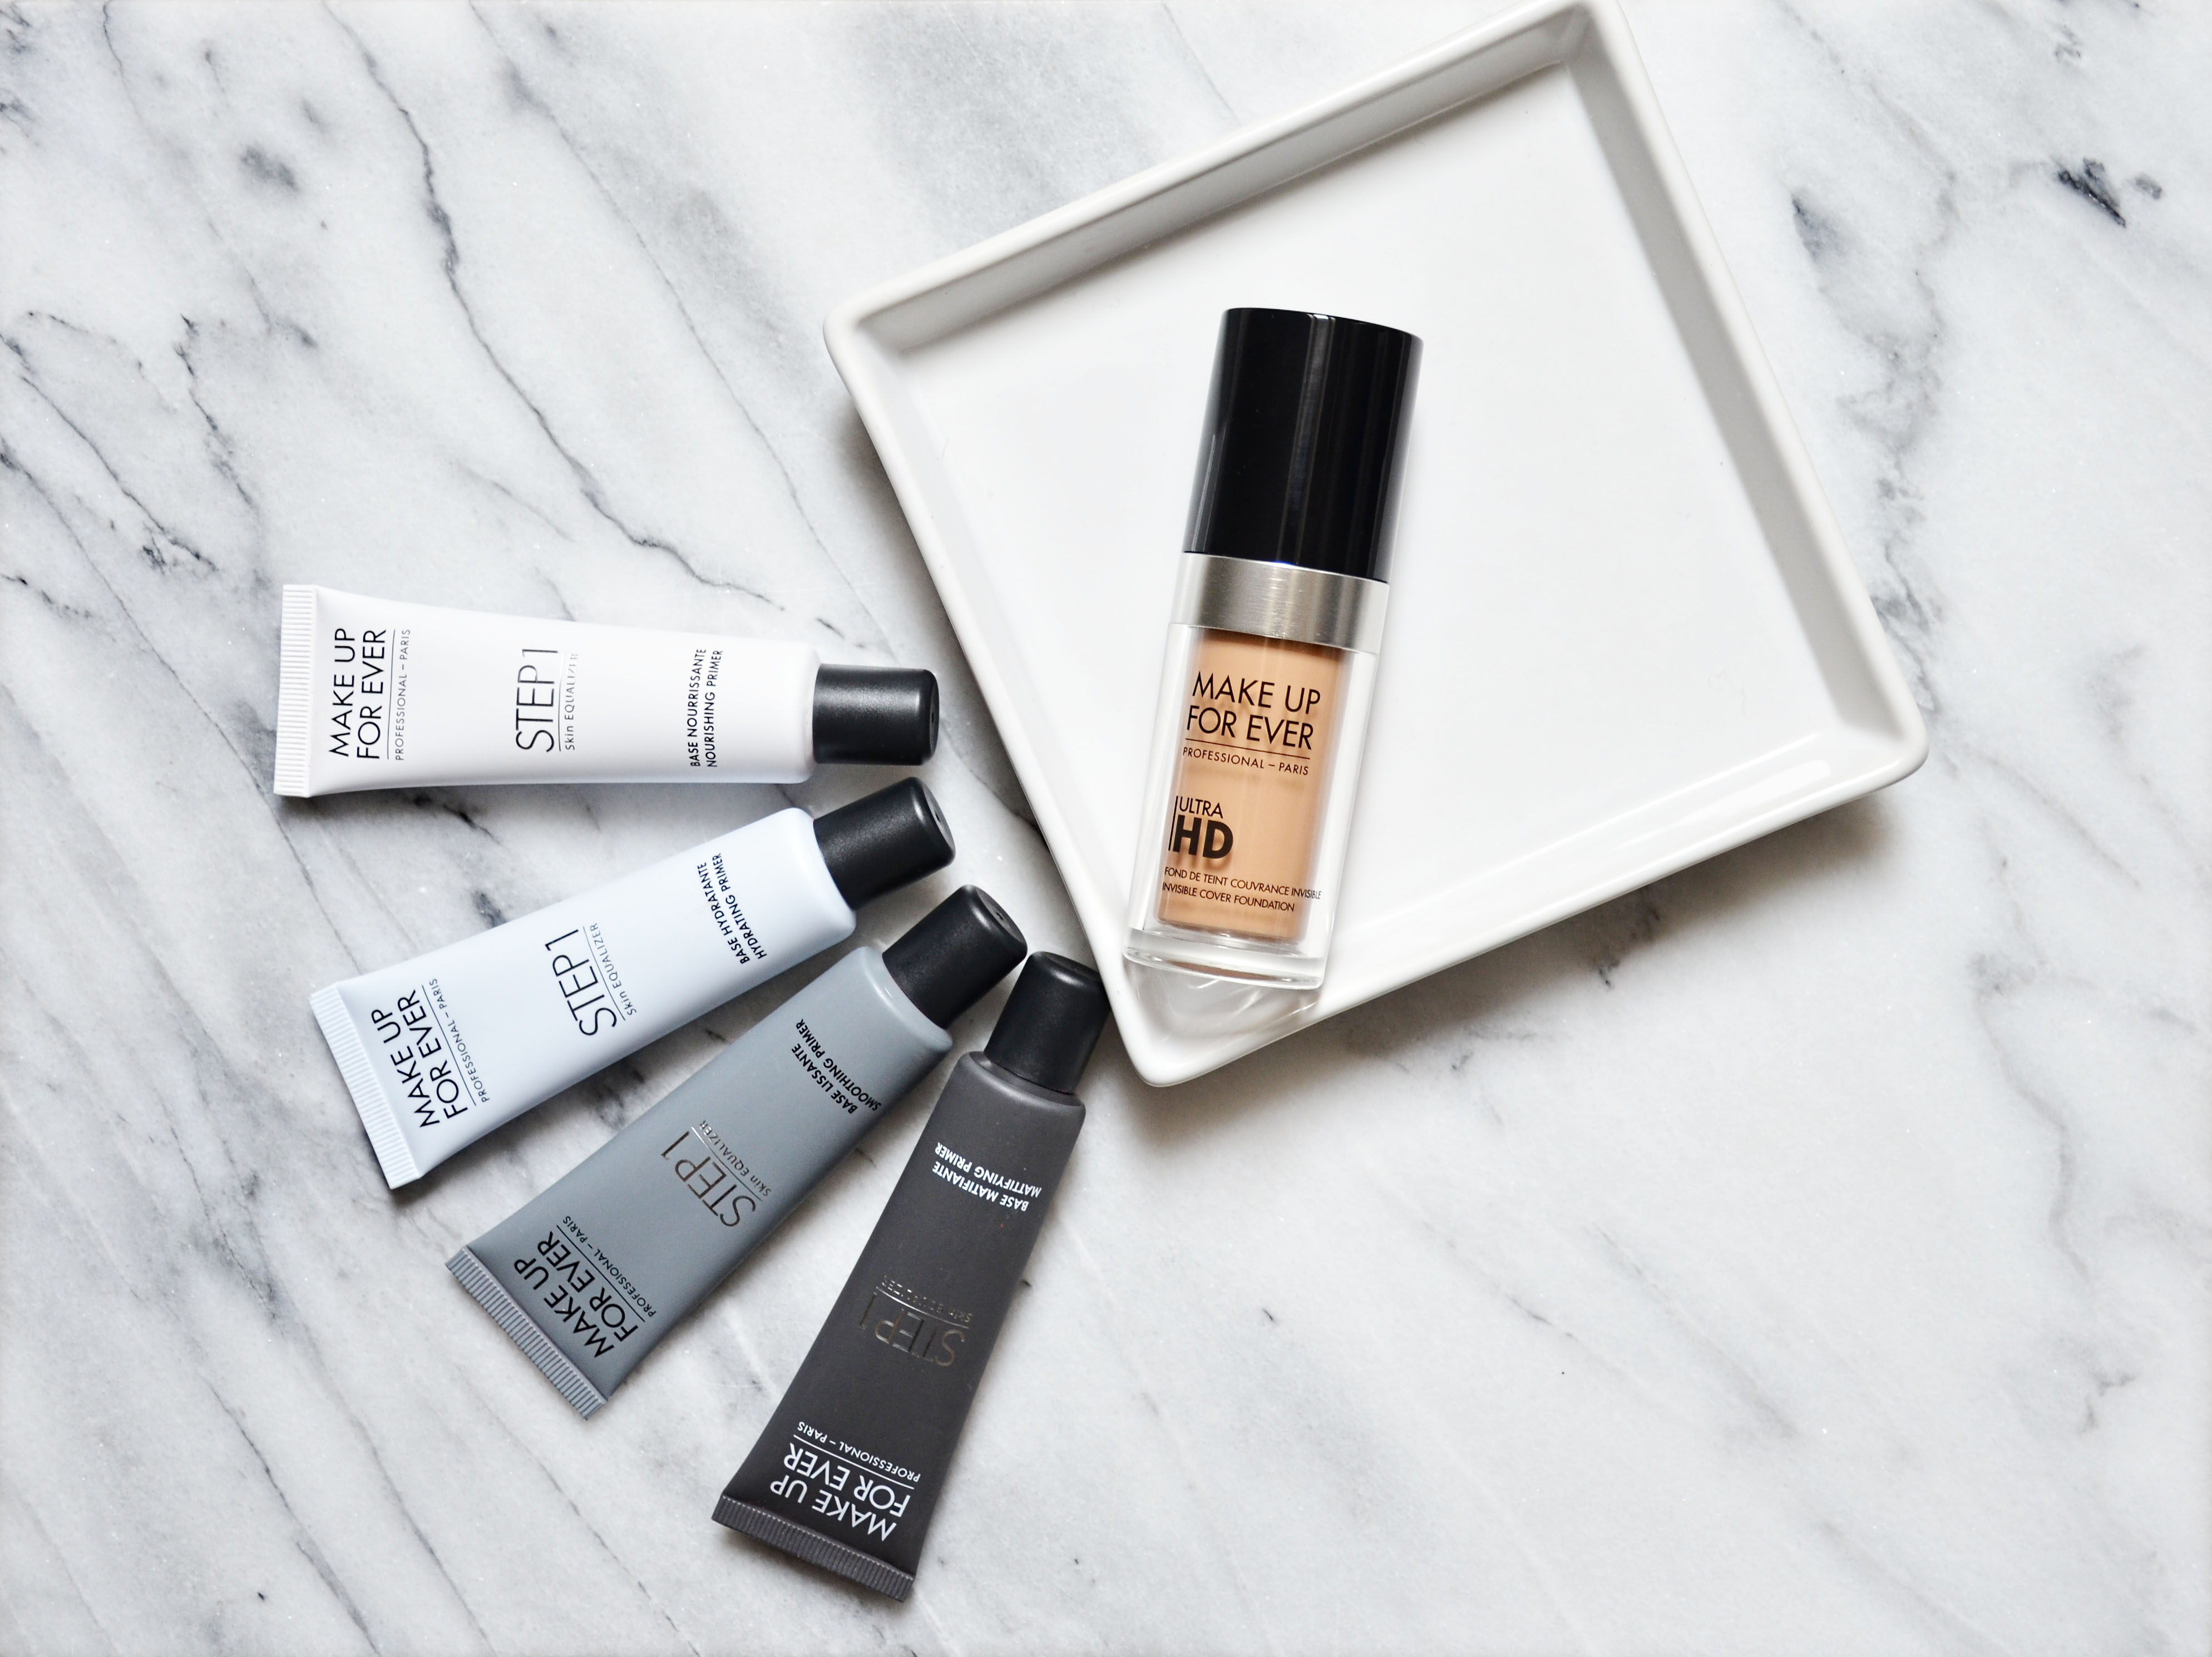 Beauty Product Review: Makeup For Ever High Definition Primer